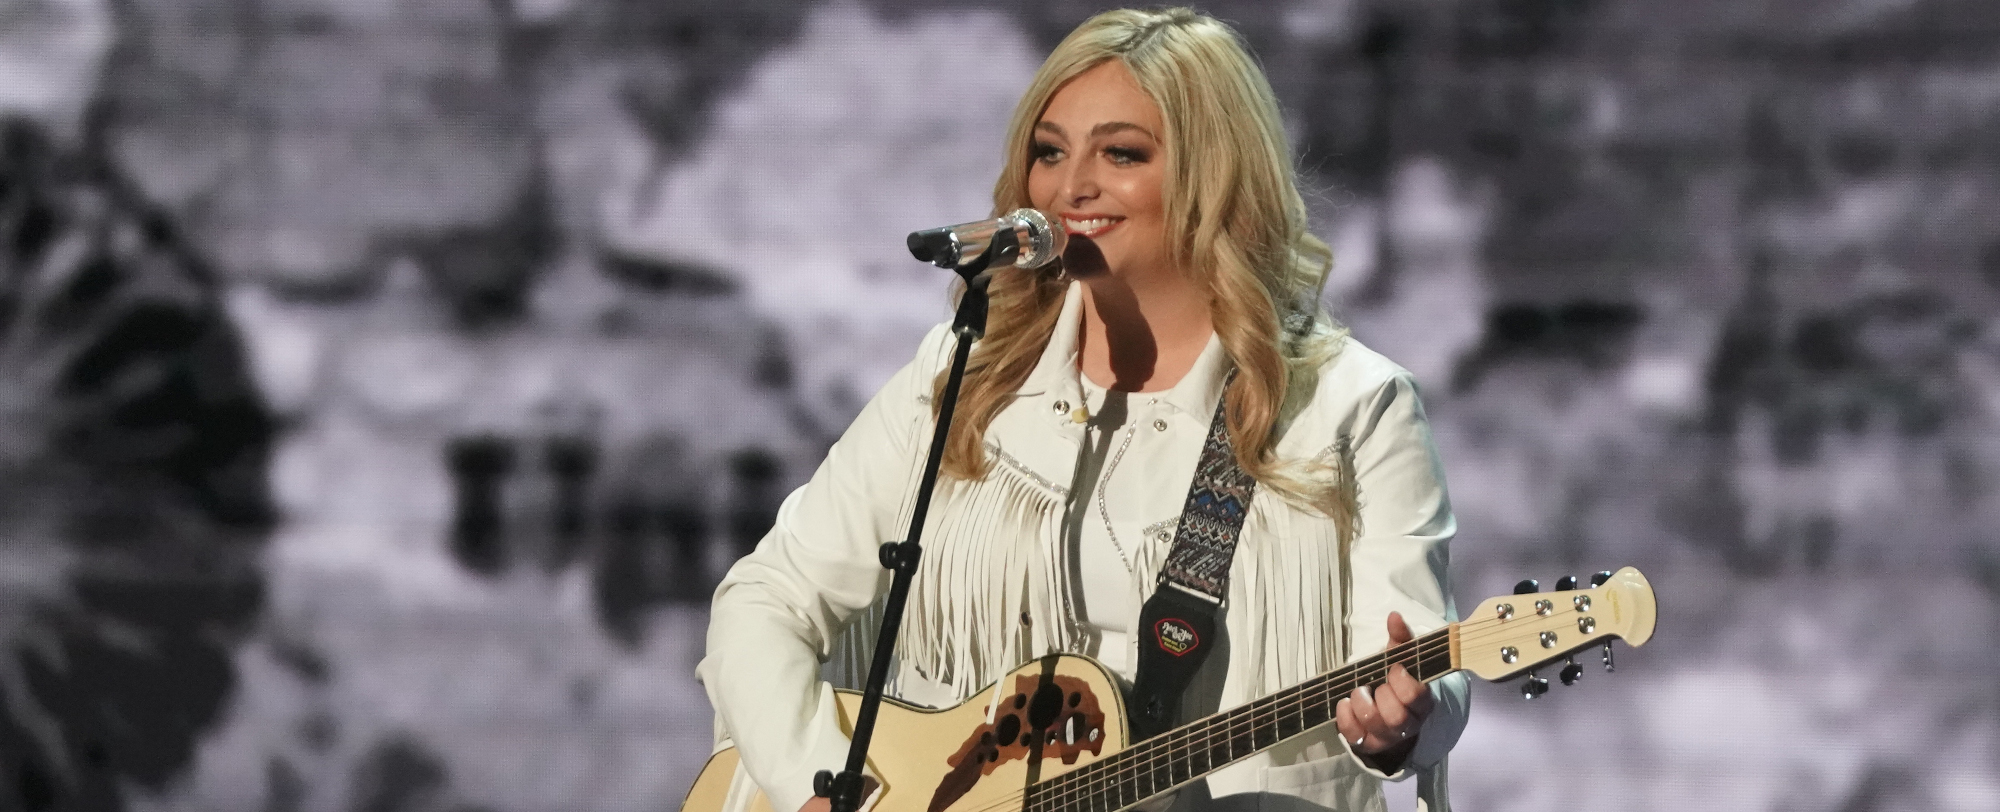 Huntergirl Dedicates ‘American Idol’ Performance of Sugarland’s “Baby Girl” to Her Parents—“I See Everything They’ve Done for Me”